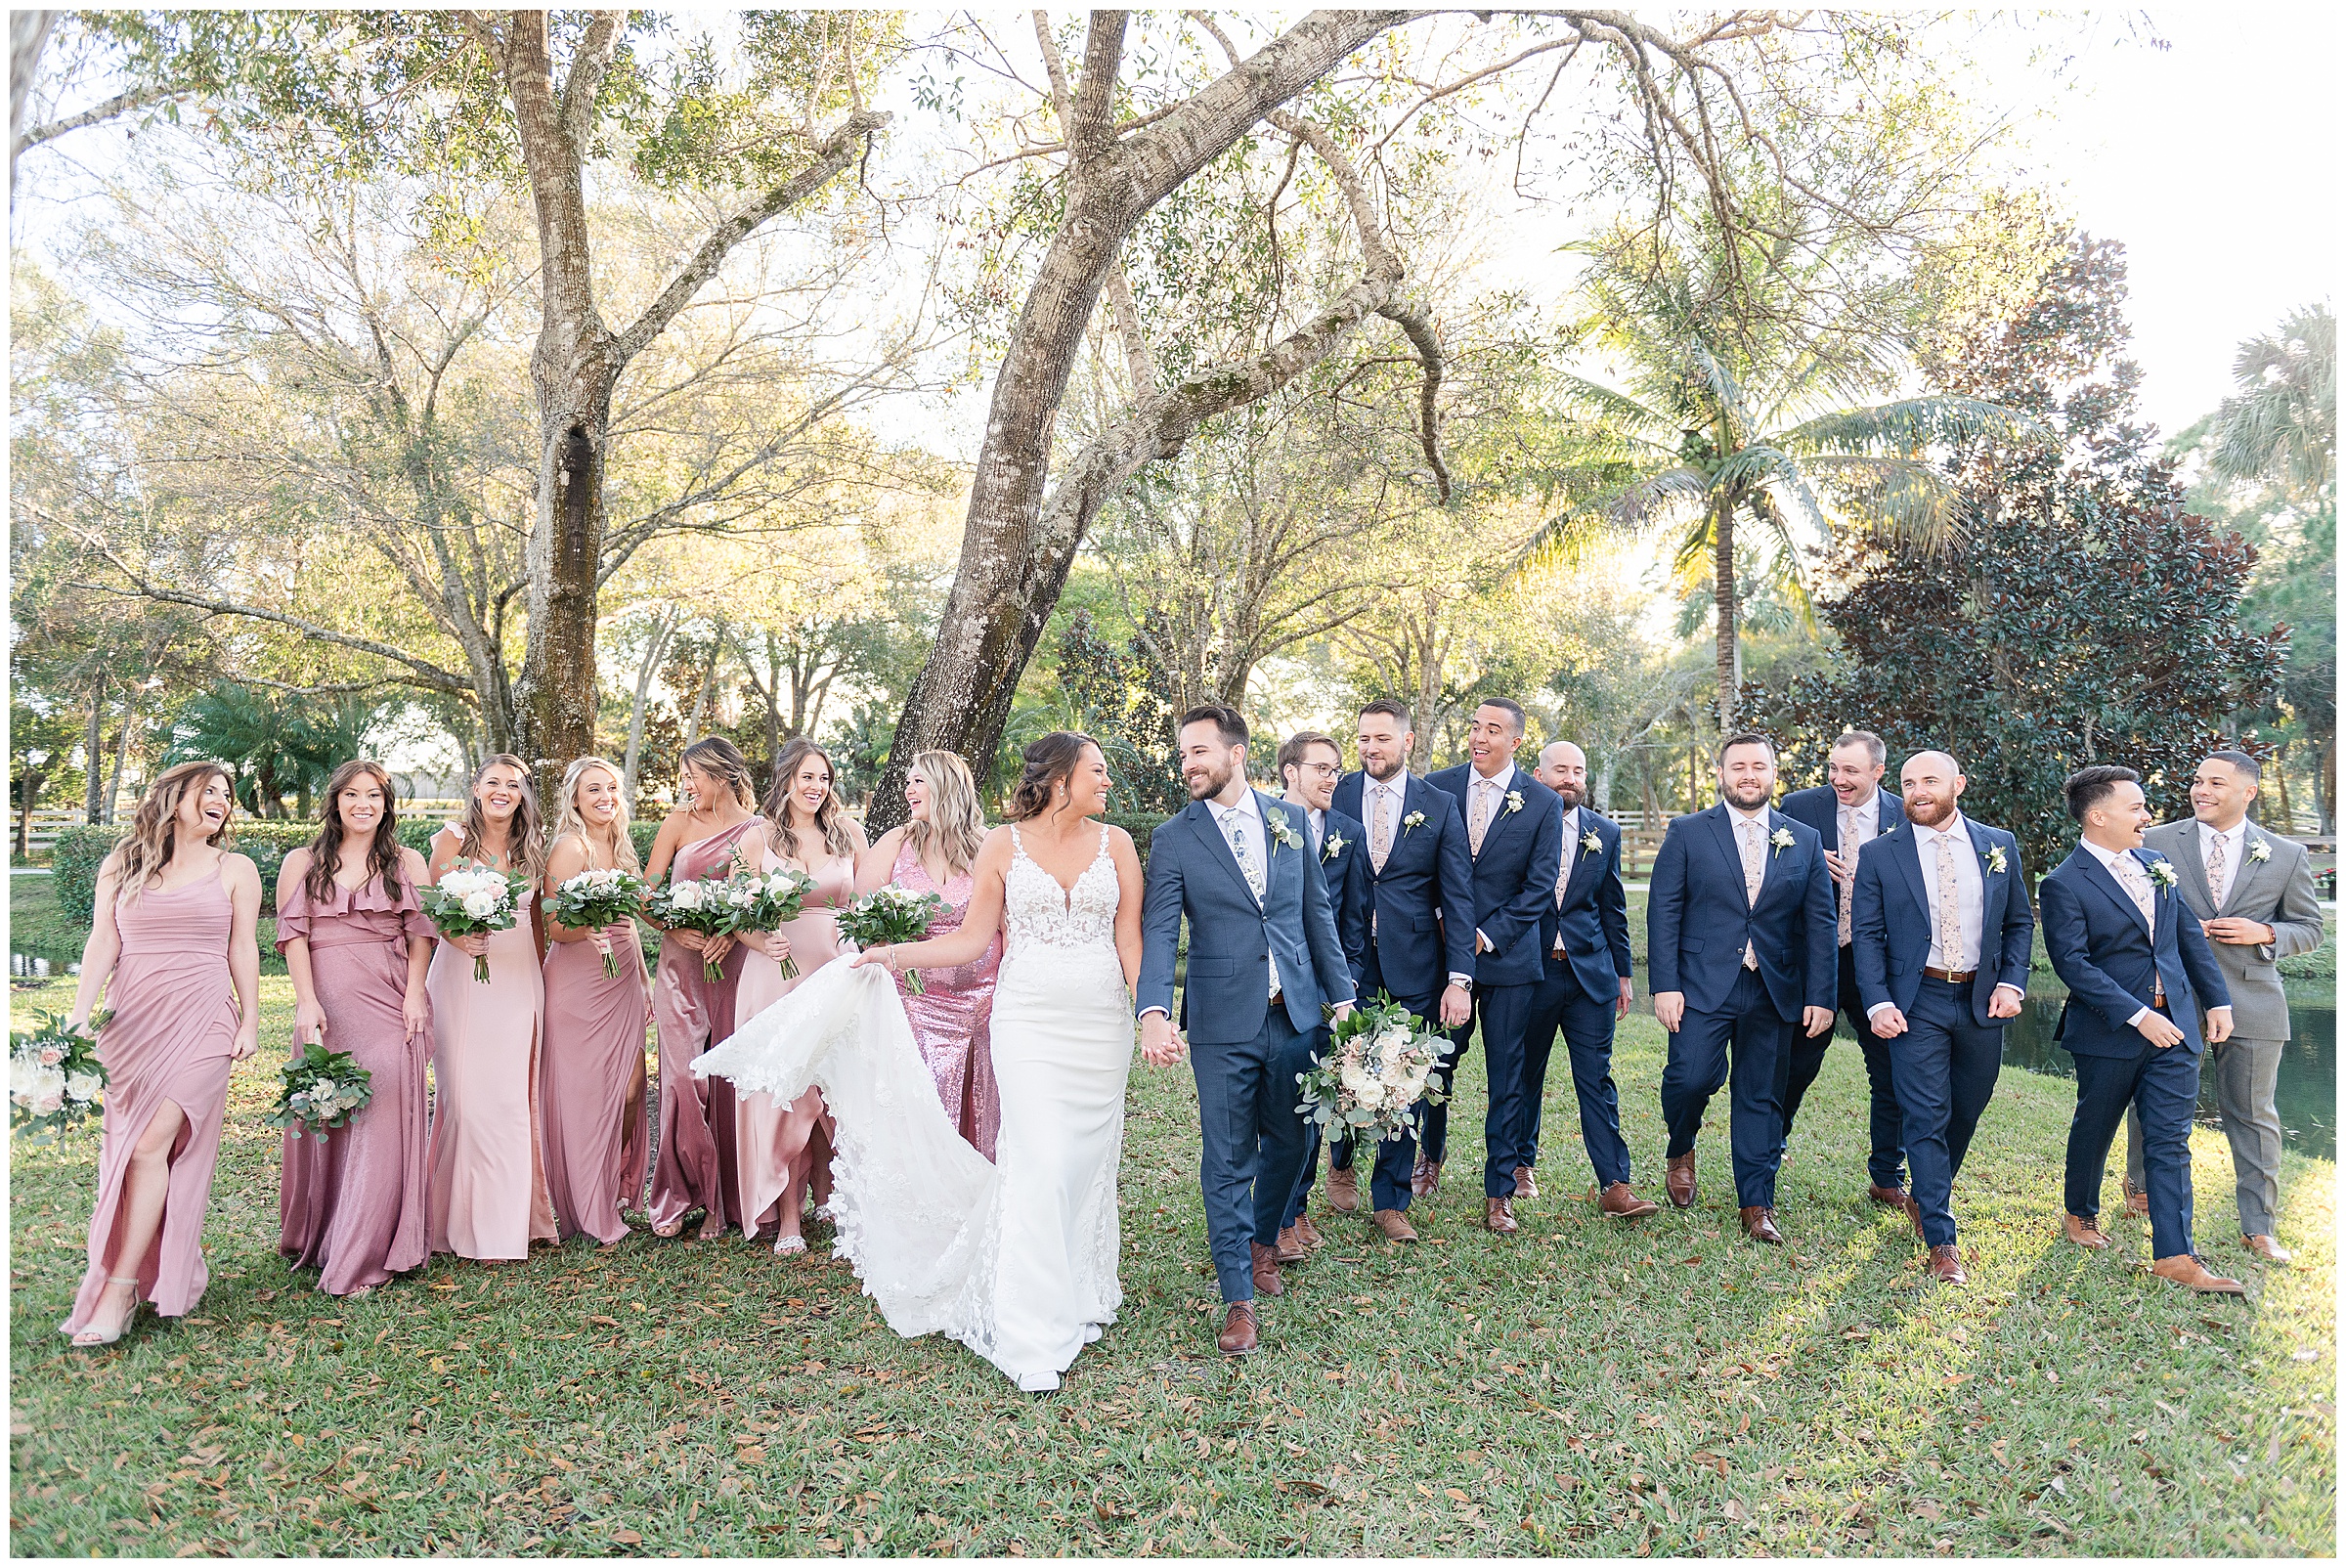 Bridesmaids and groomsmen walking with the bride and groom laughing and talking | Magnolia Manor Wedding in Vero Beach